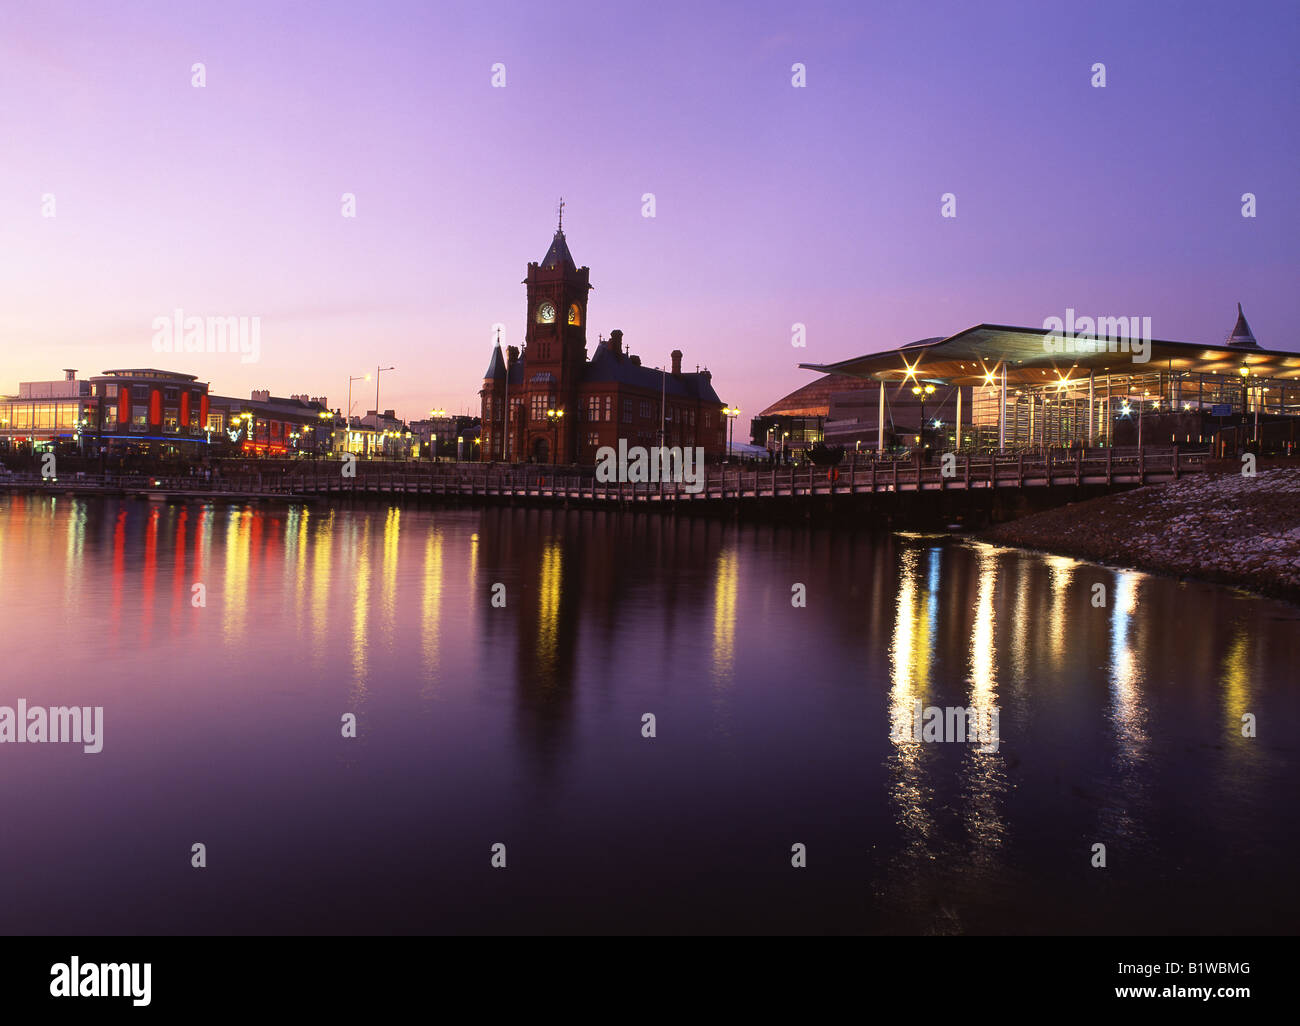 Senedd Welsh Assembly Building and Pierhead Cardiff Bay Twilight / night view Cardiff South Wales UK Stock Photo